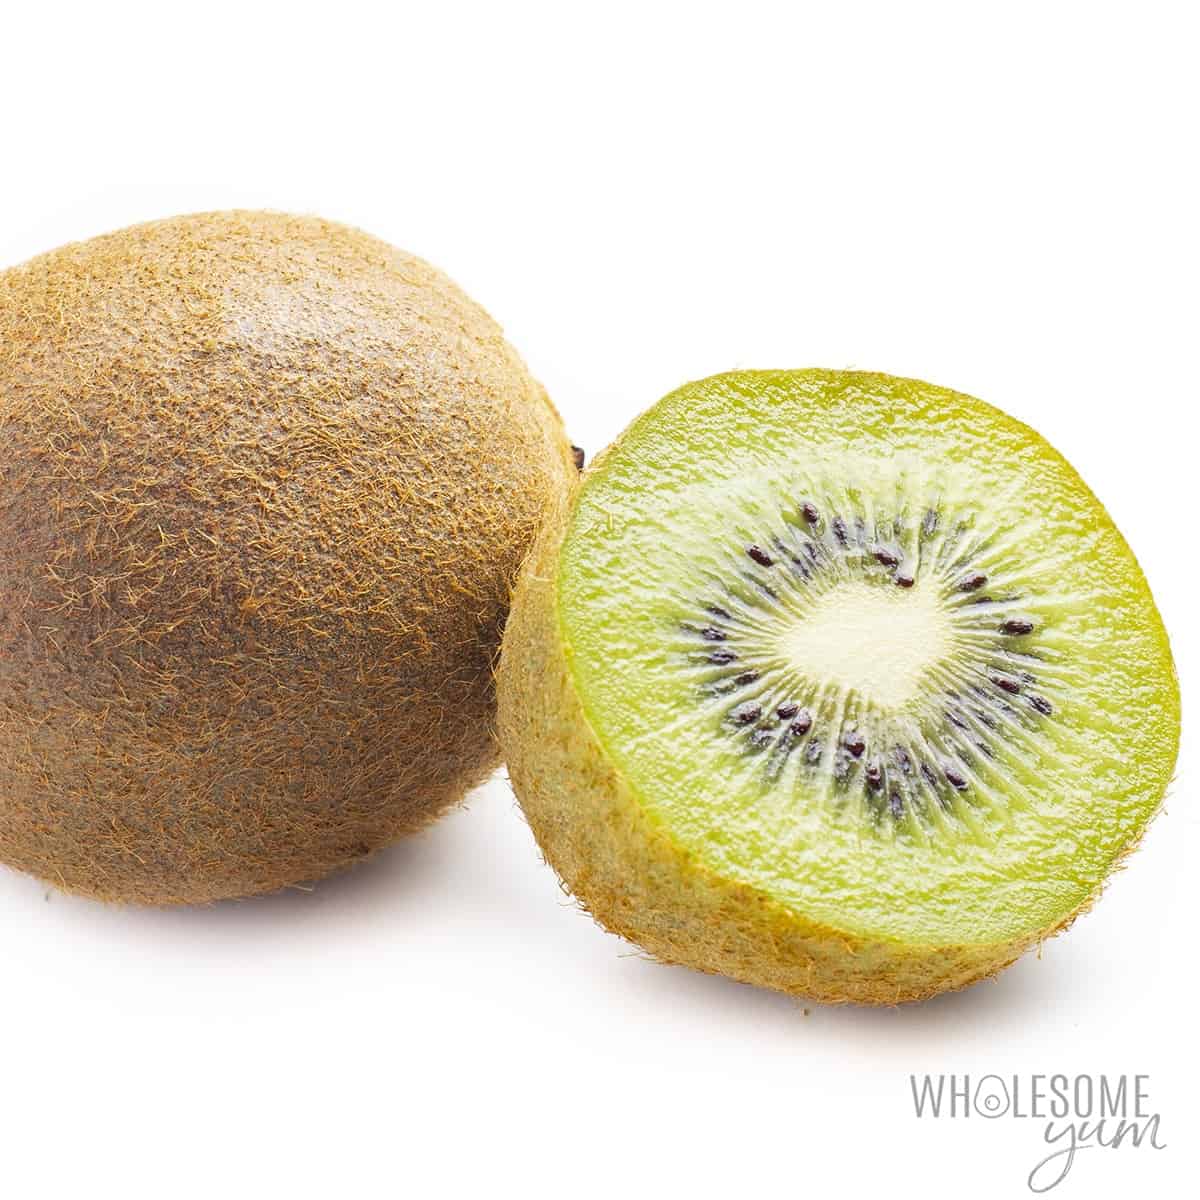 Is kiwi keto, or are carbs in kiwi too high? With portion control, this fresh kiwi can be keto.